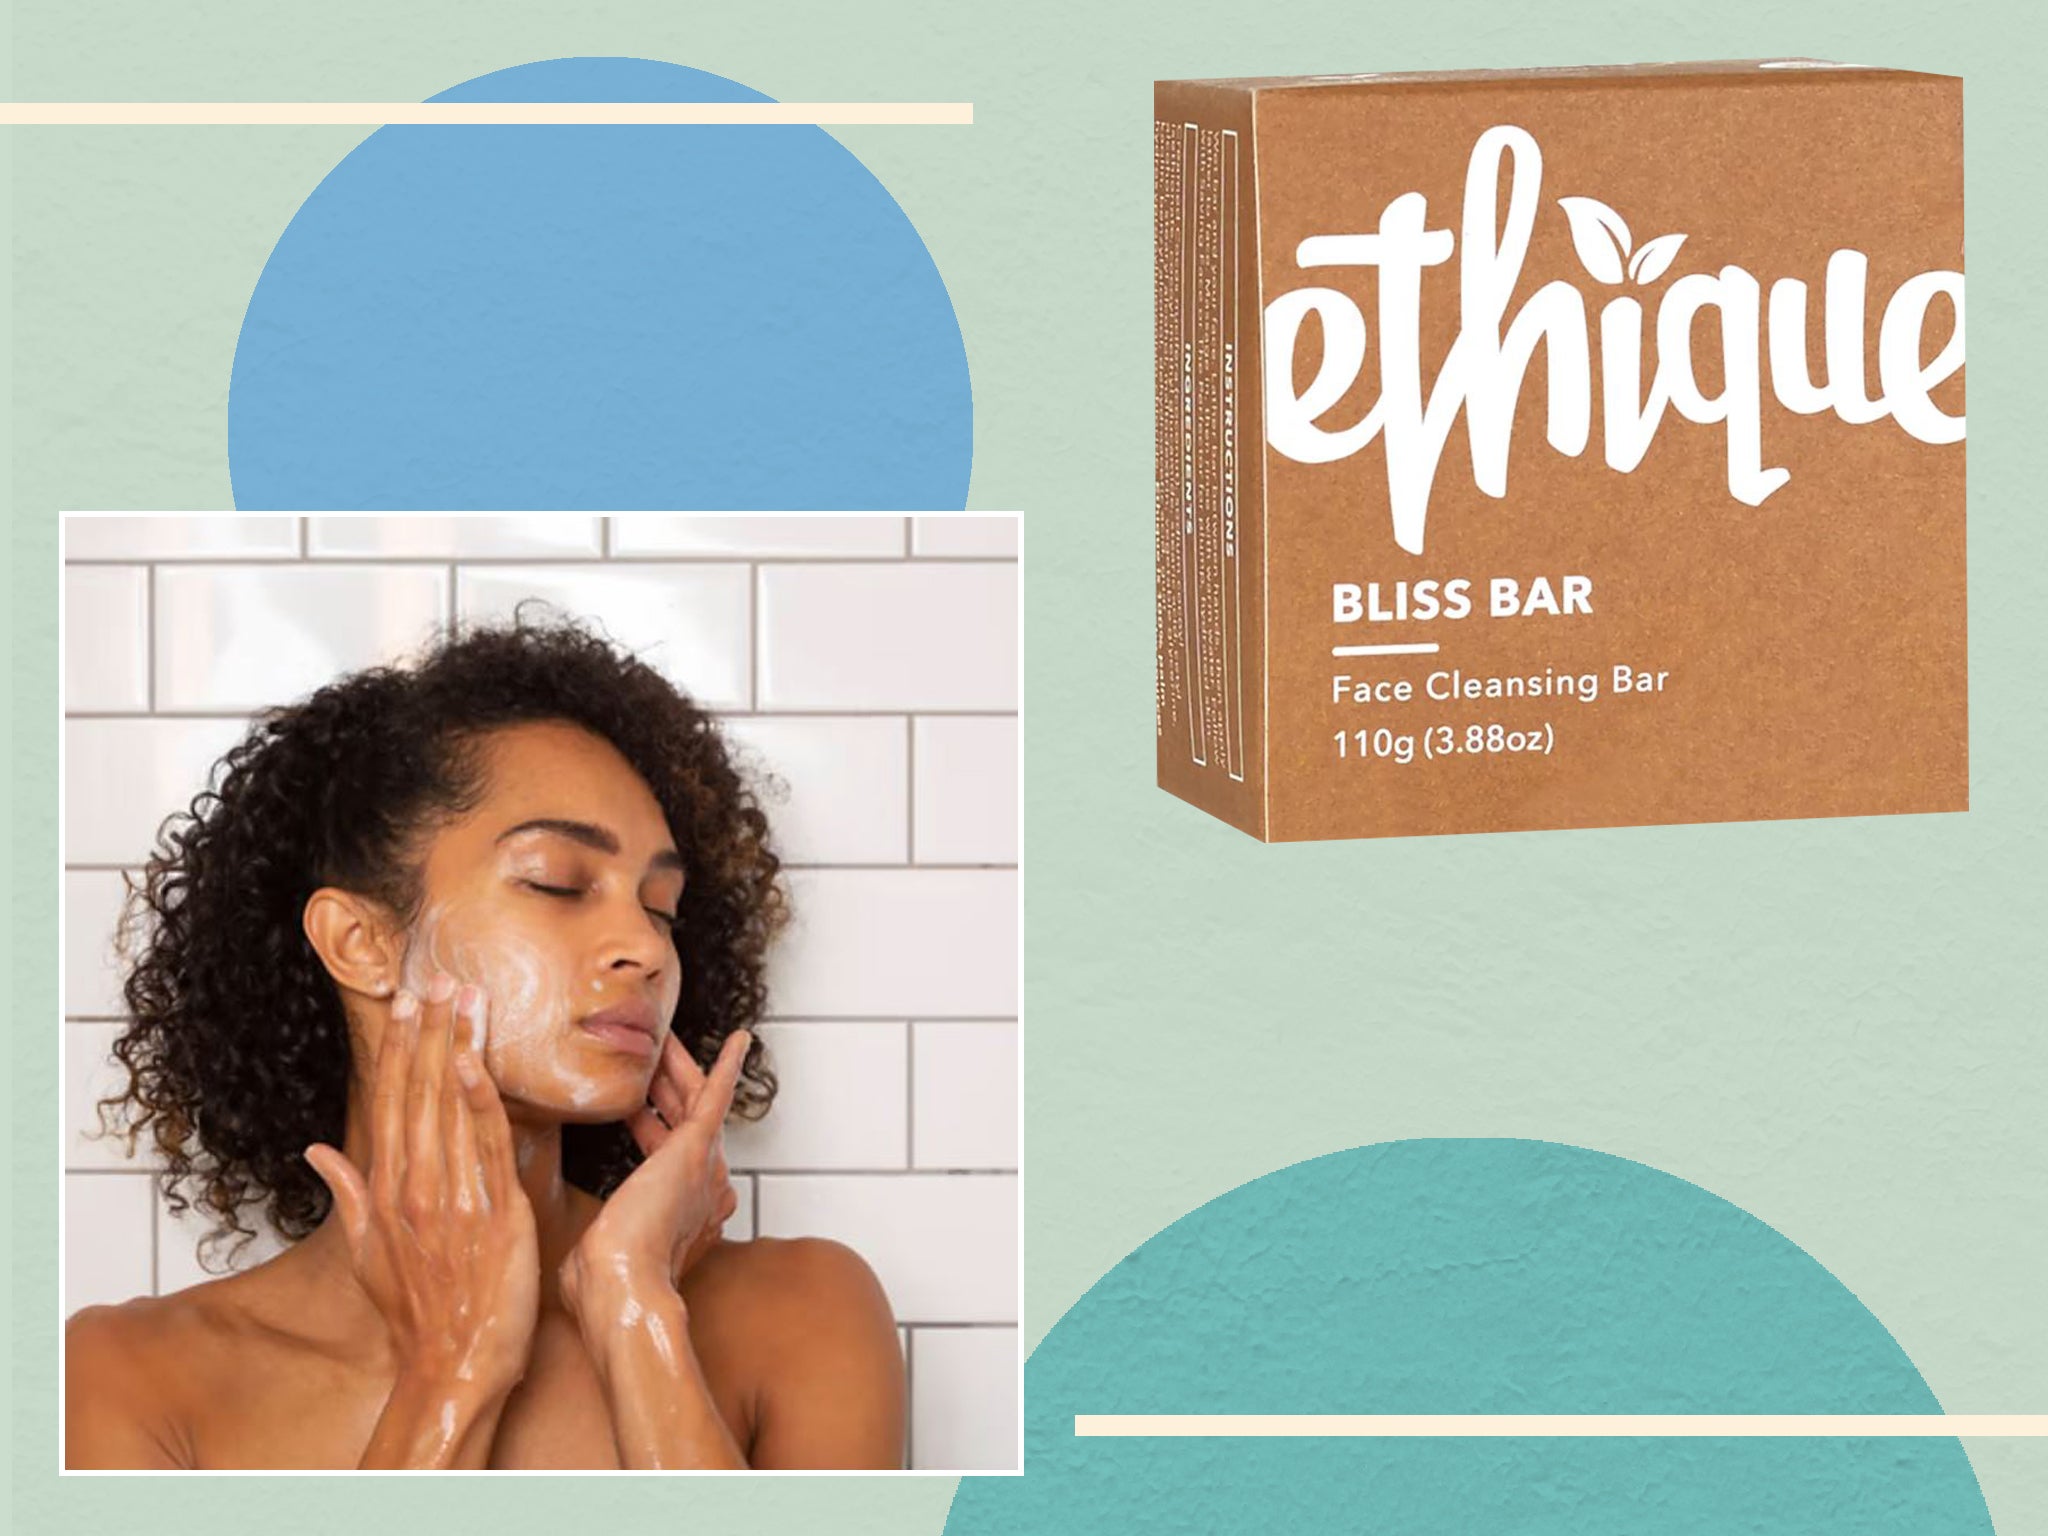 This facial cleansing bar is a plastic-free alternative to your everyday essential